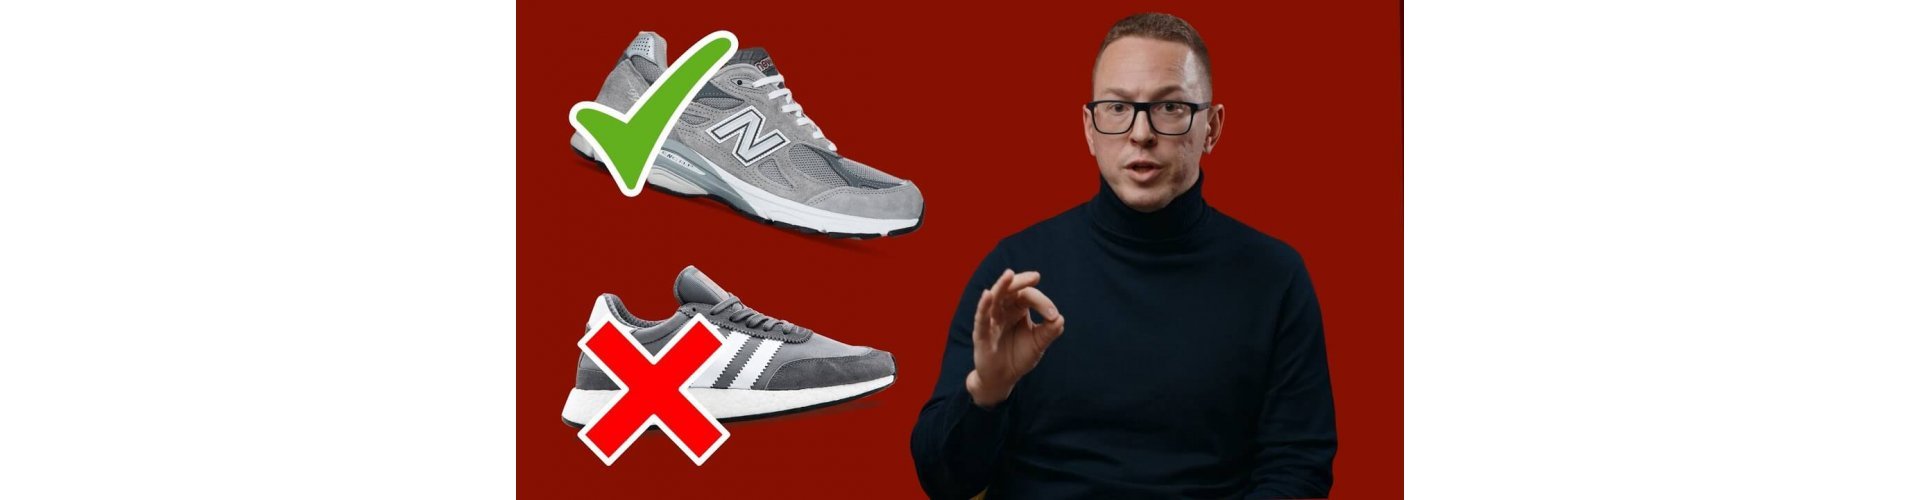 How to choose a sneakers? Advice from a professional!